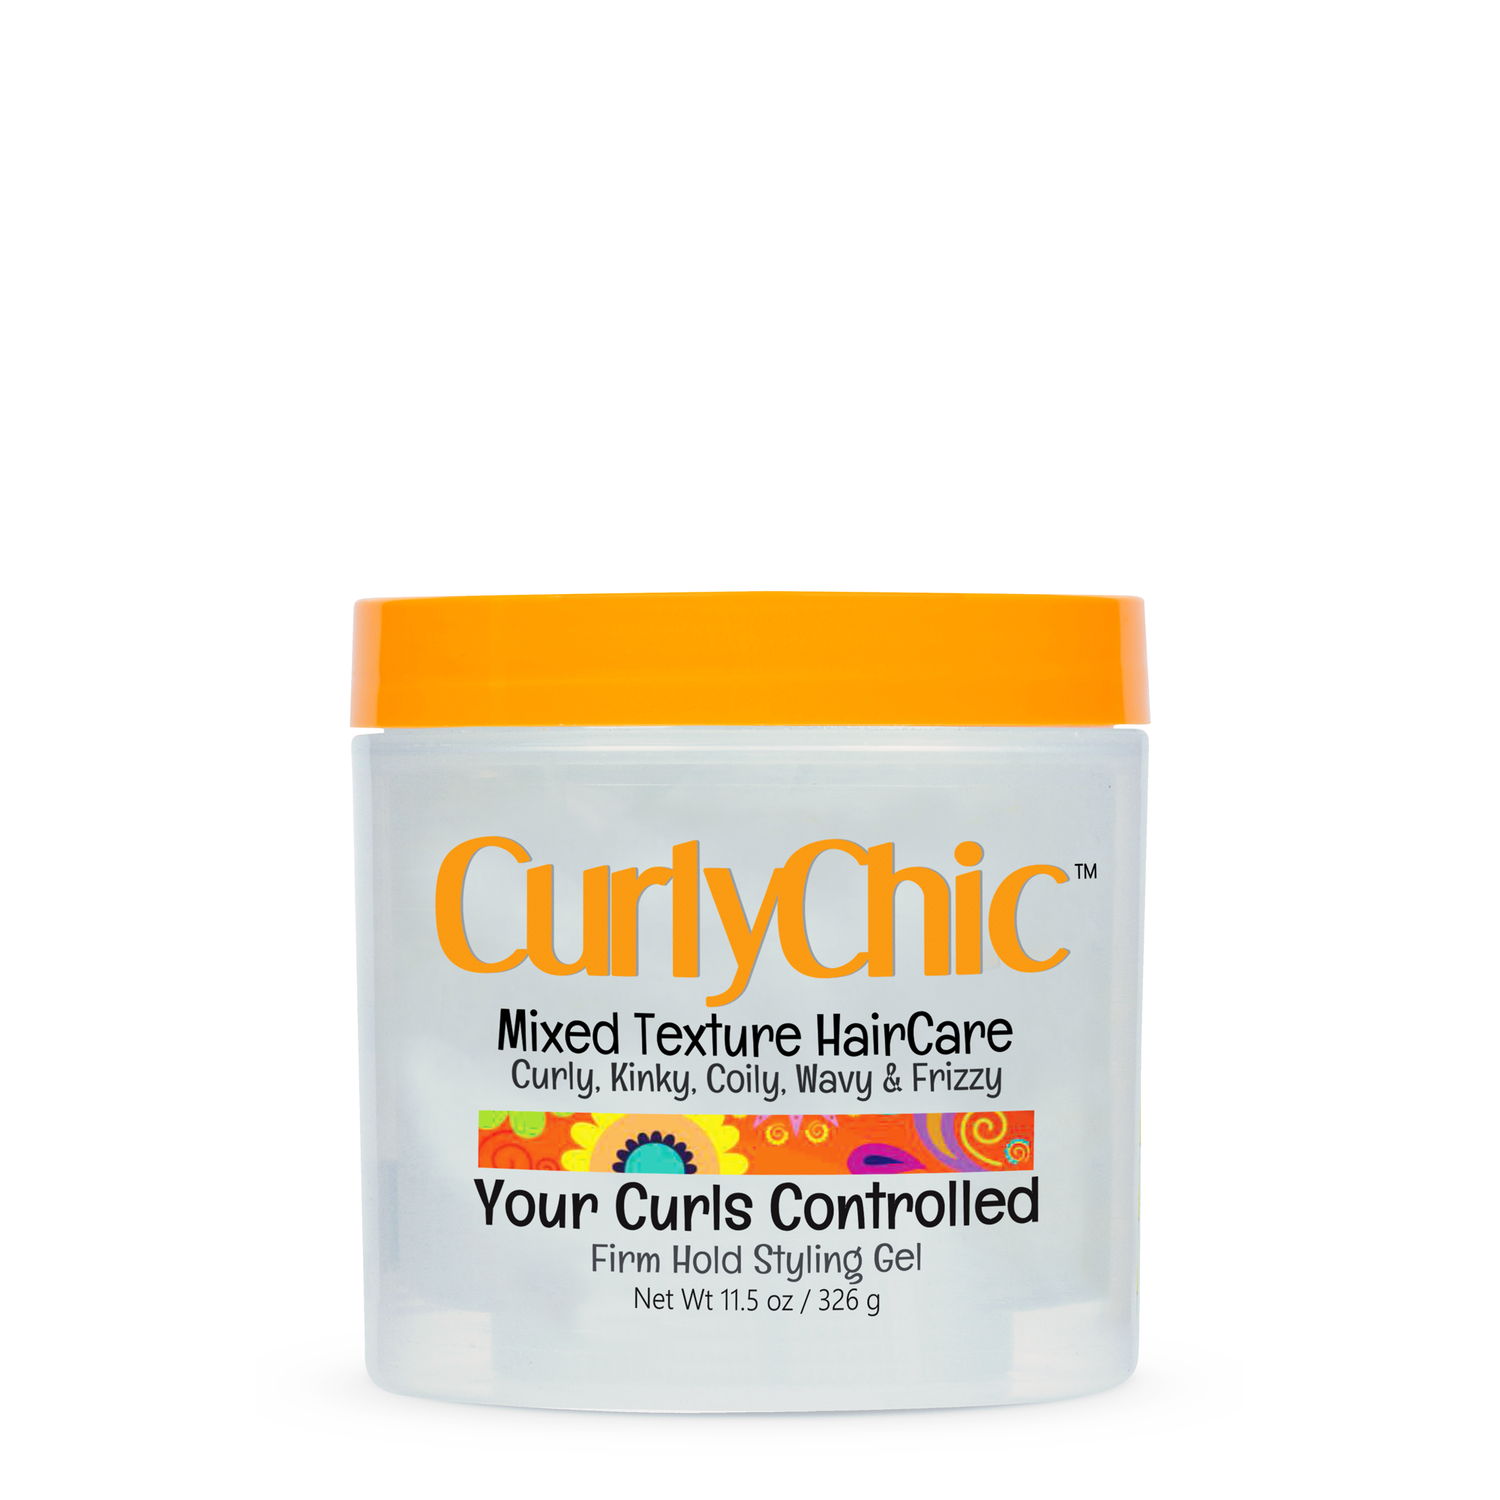 Curly Chic Mixed Texture HairCare Your Curls Controlled - 11.5 Oz